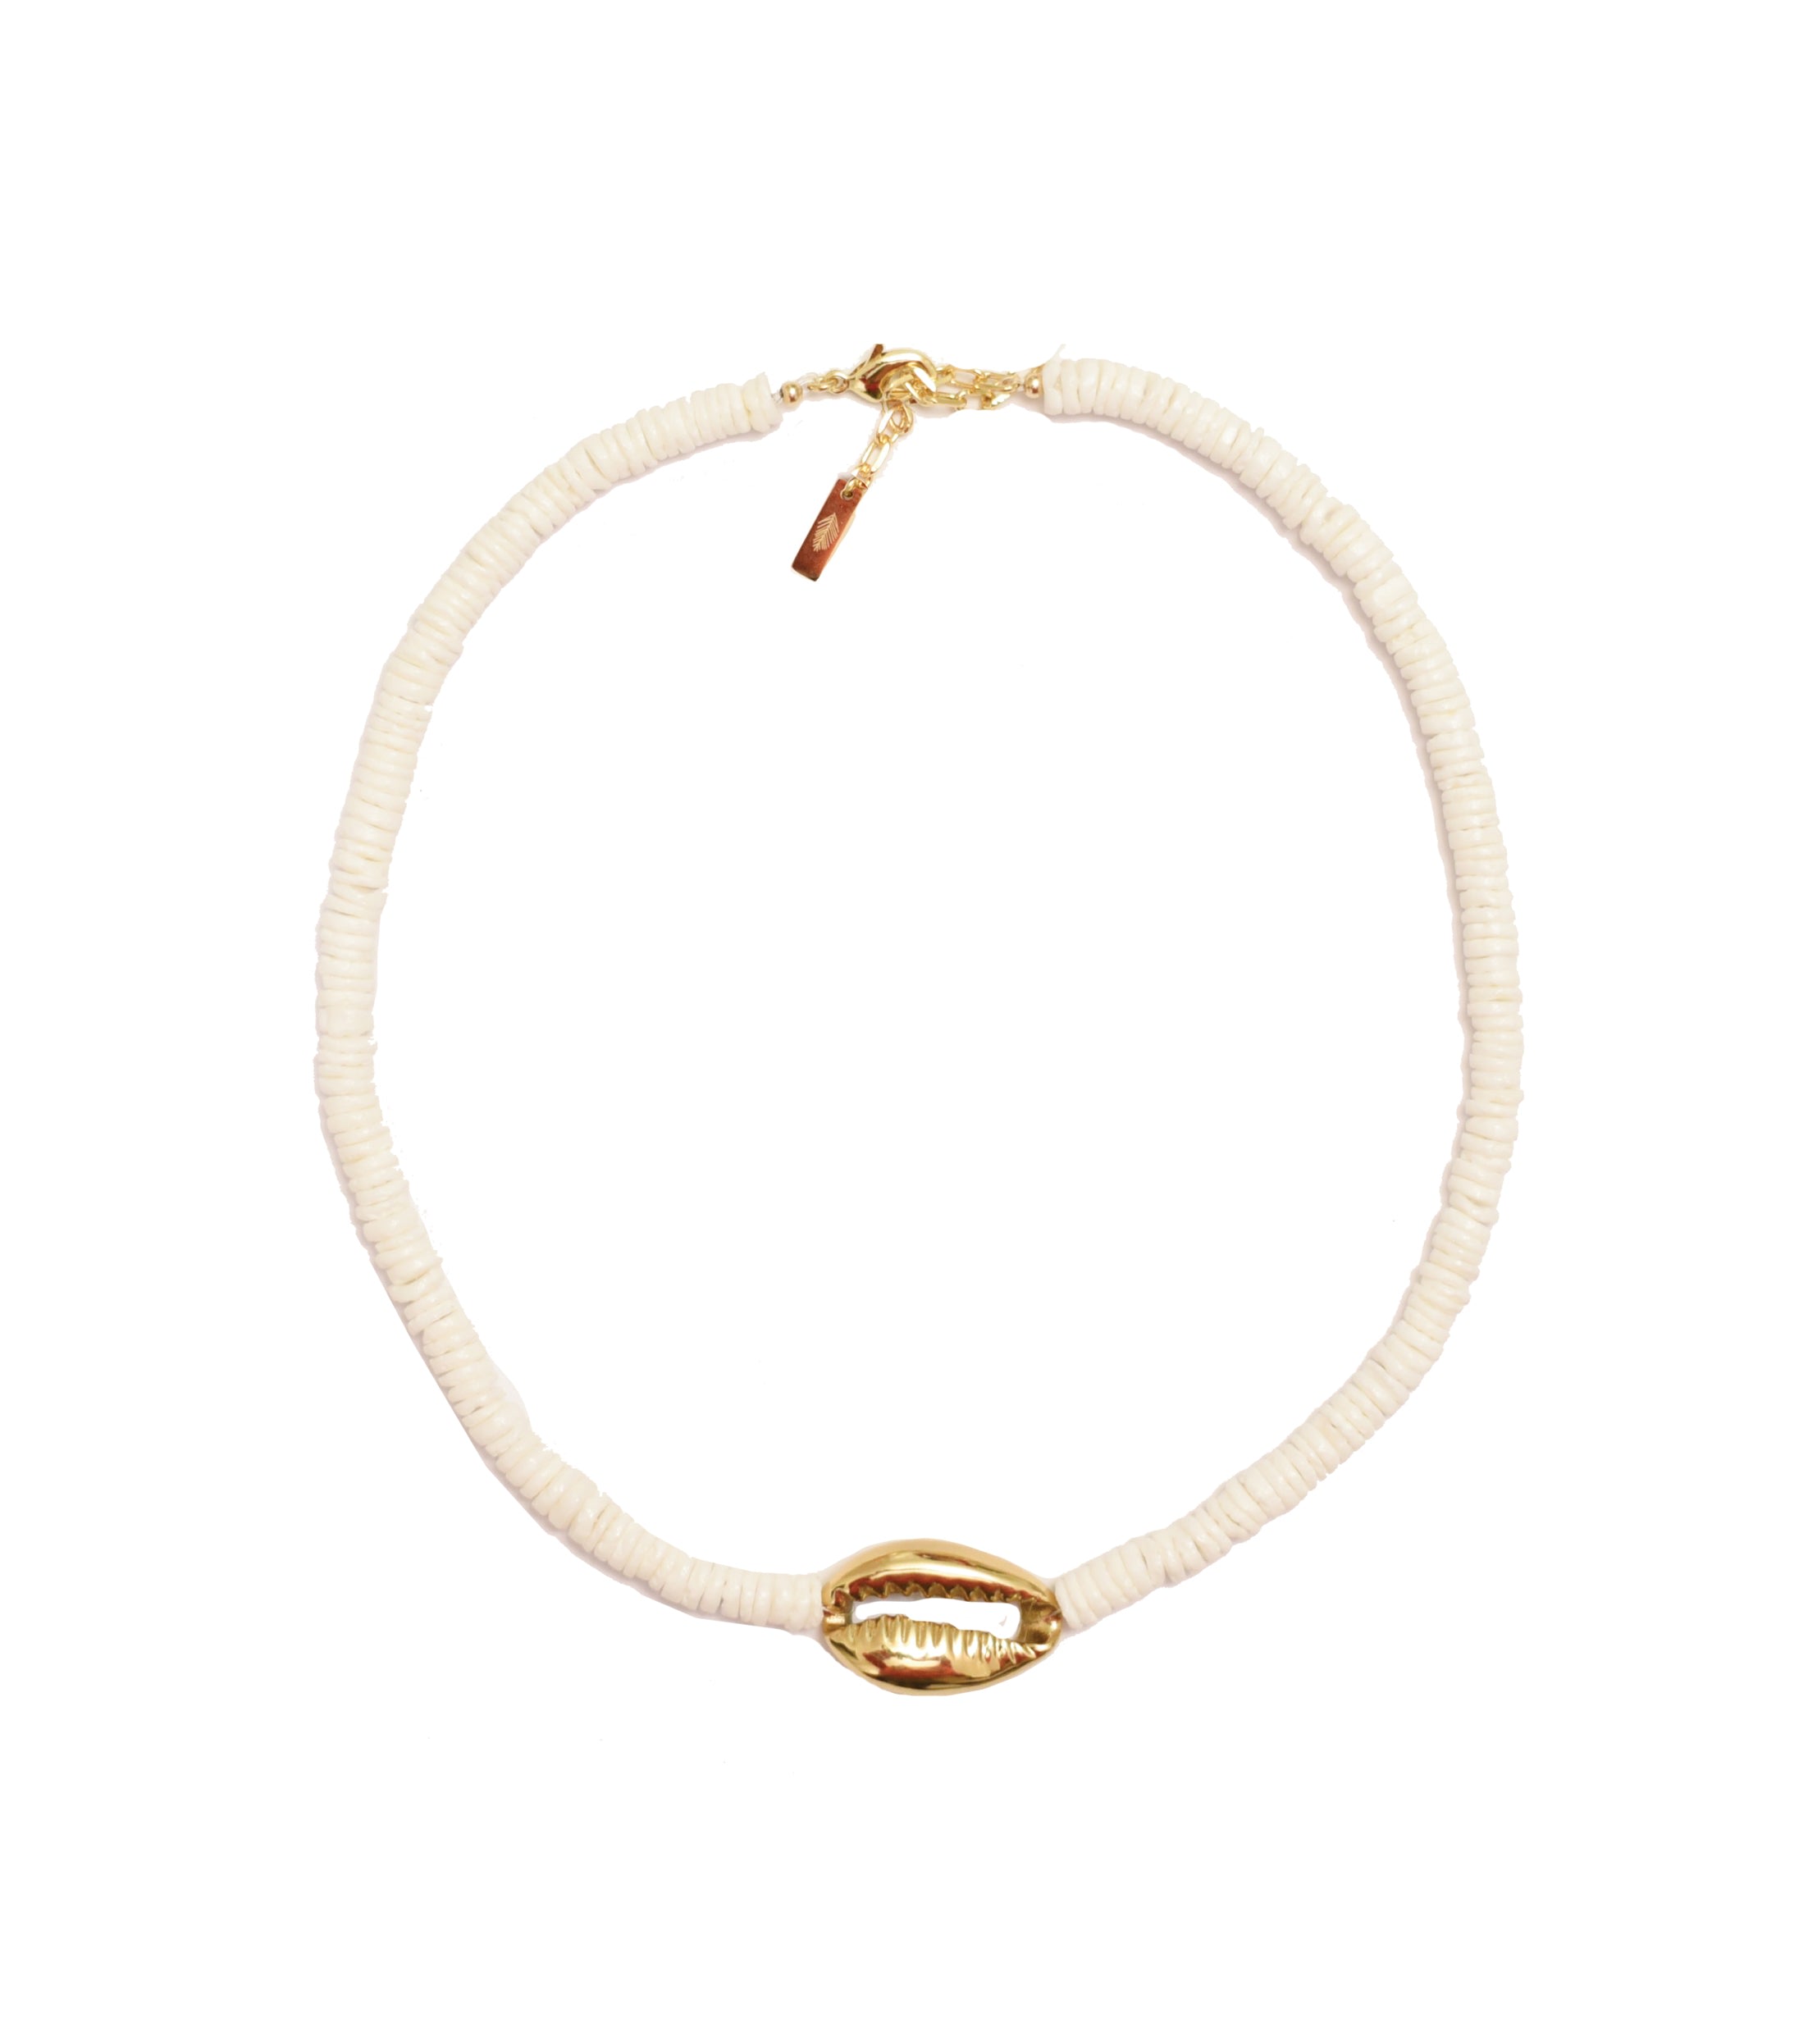 Women’s Heishi Gold Shell Necklace - White Adriana Pappas Designs